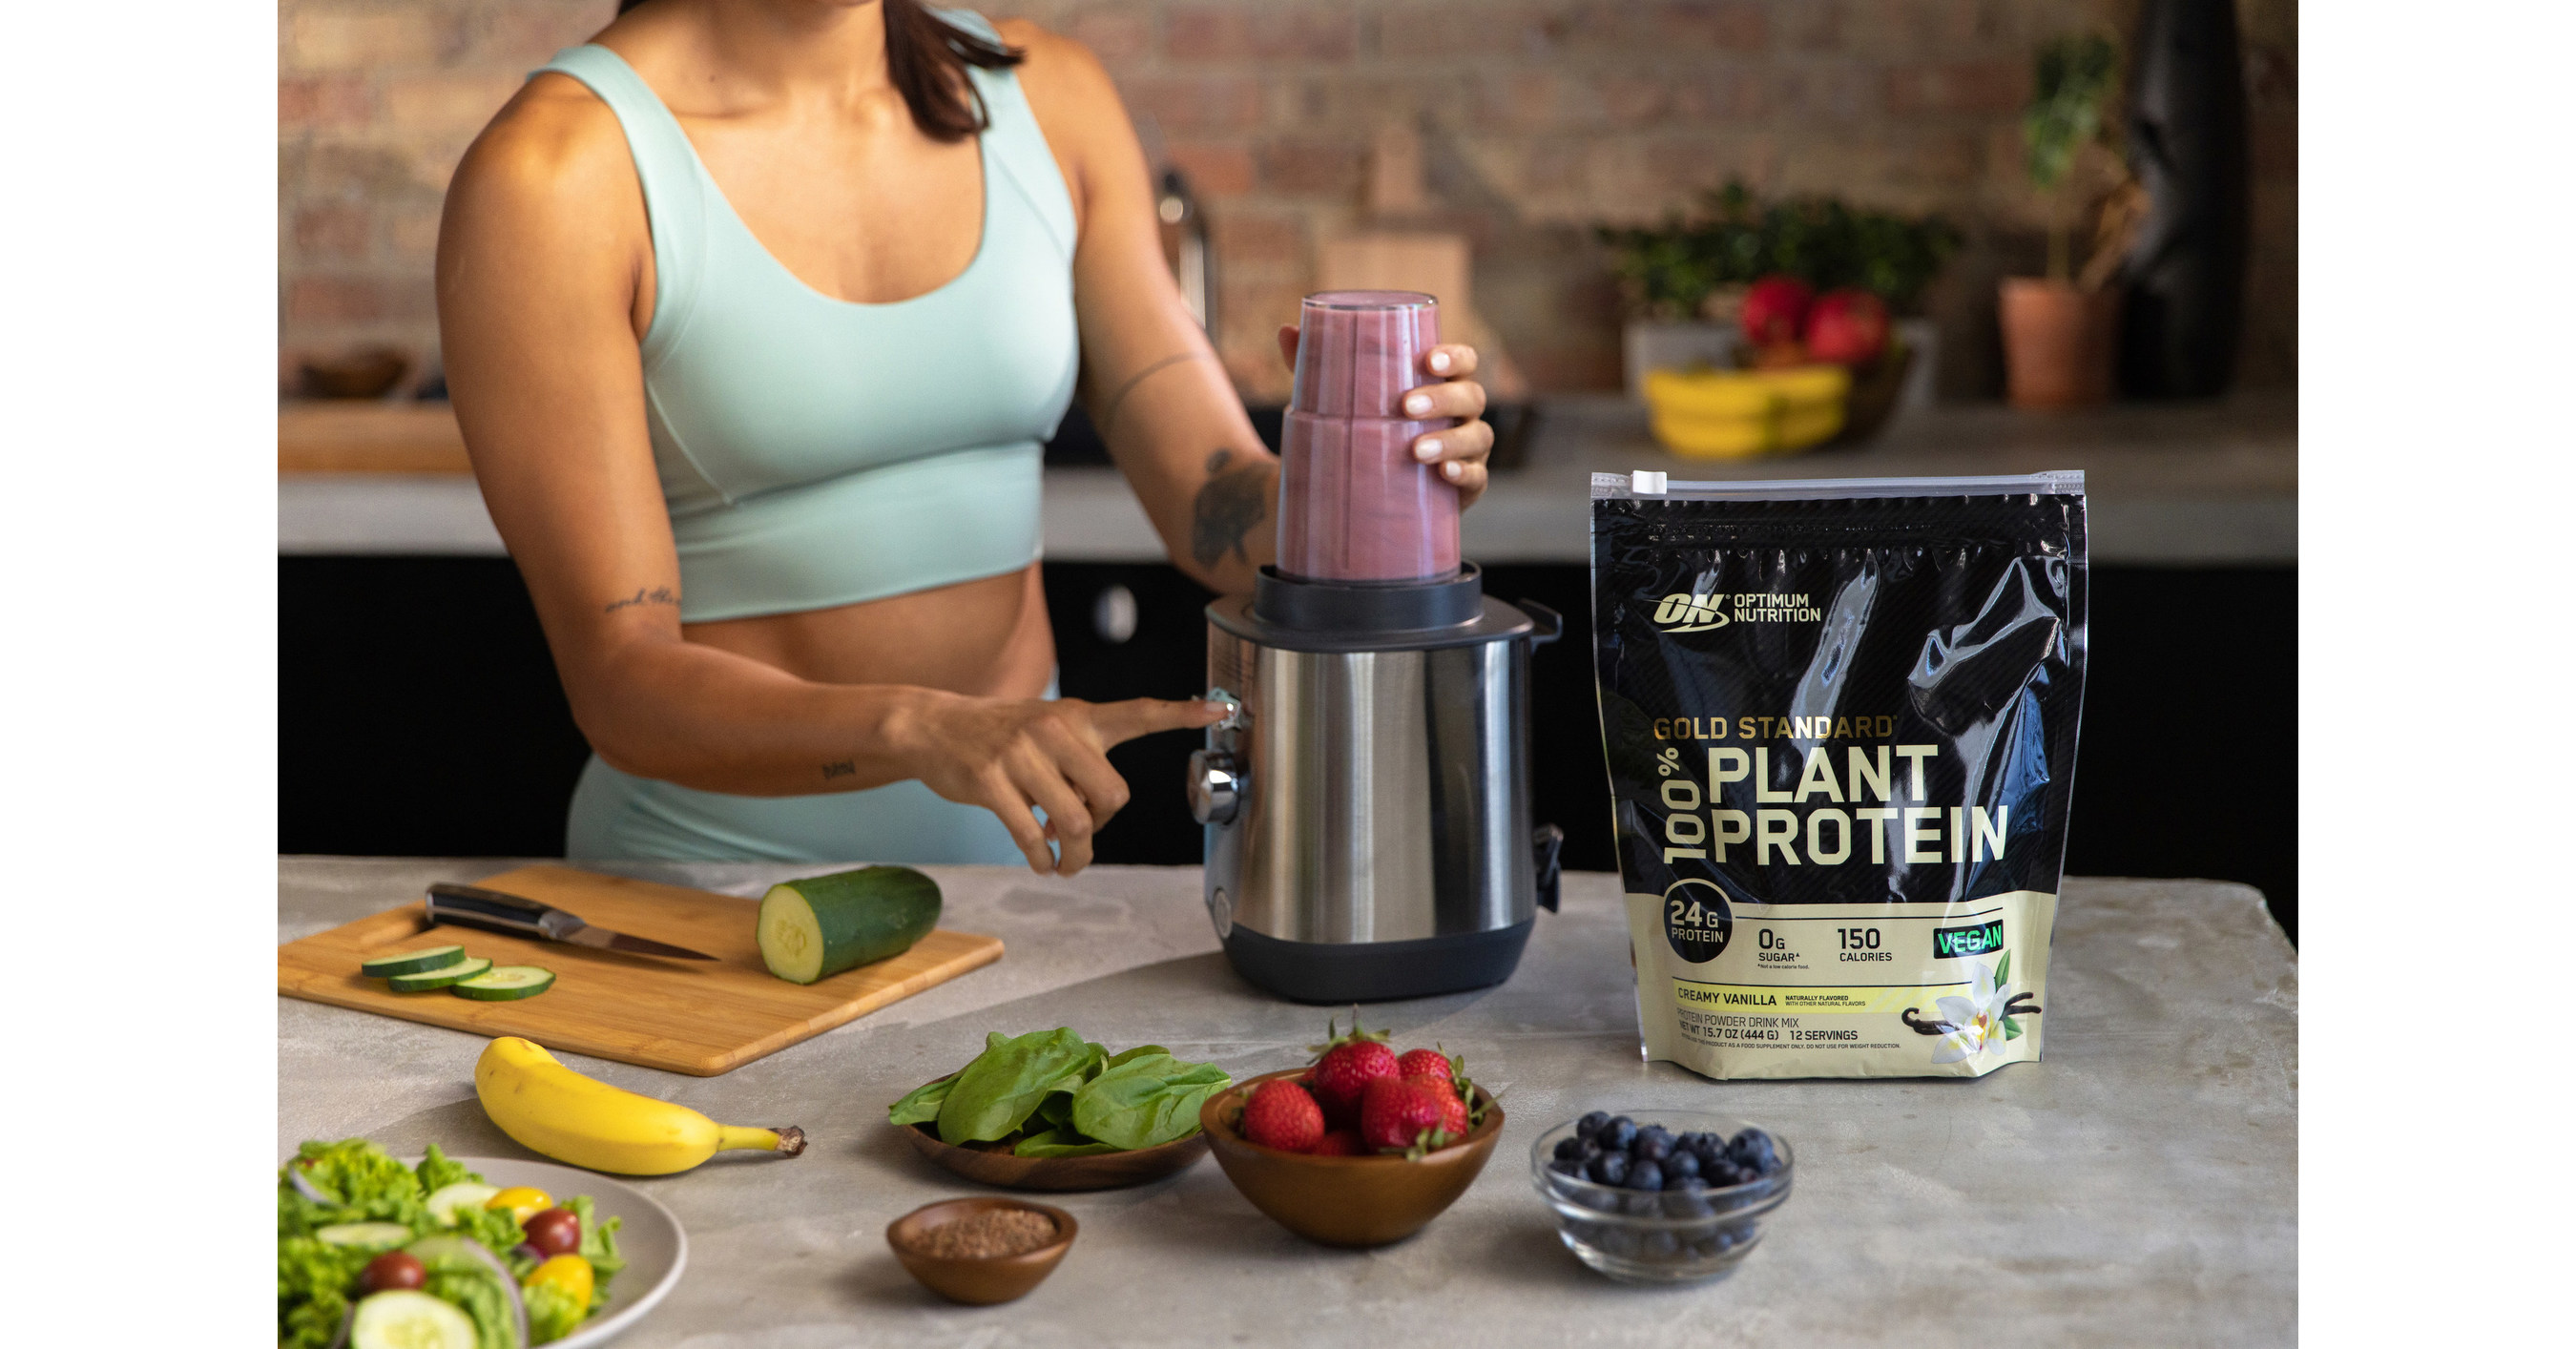 tilnærmelse Tyr lidenskab Optimum Nutrition Debuts Gold Standard 100% Plant Protein and is  Celebrating Fall with the "Gold Standard Goes Plant" Challenge